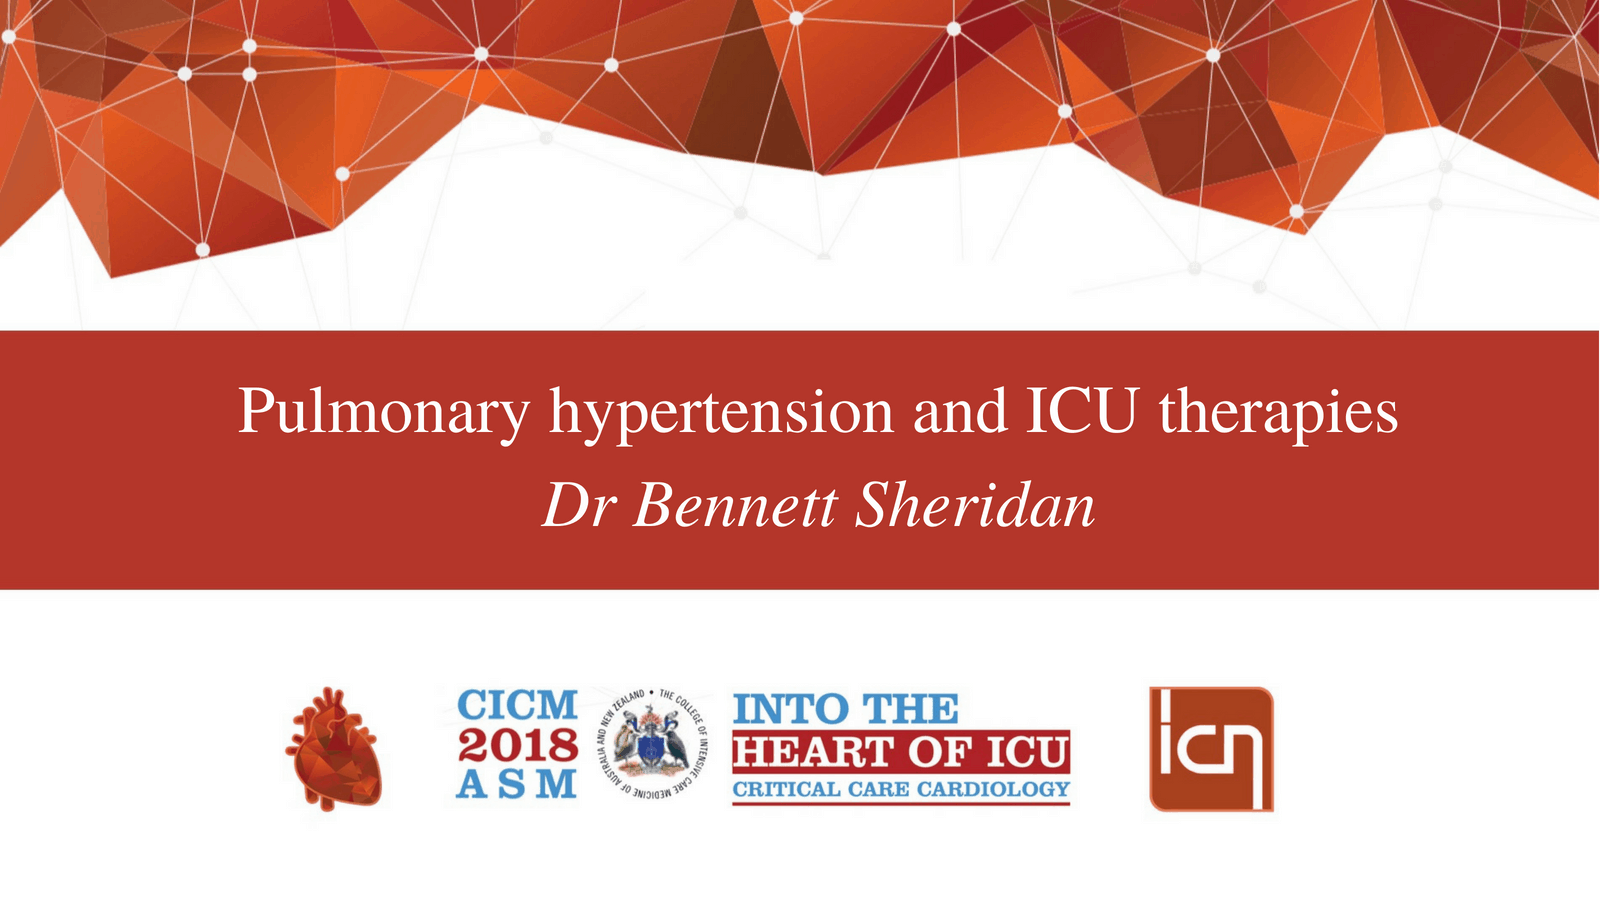 Pulmonary hypertension and ICU therapies